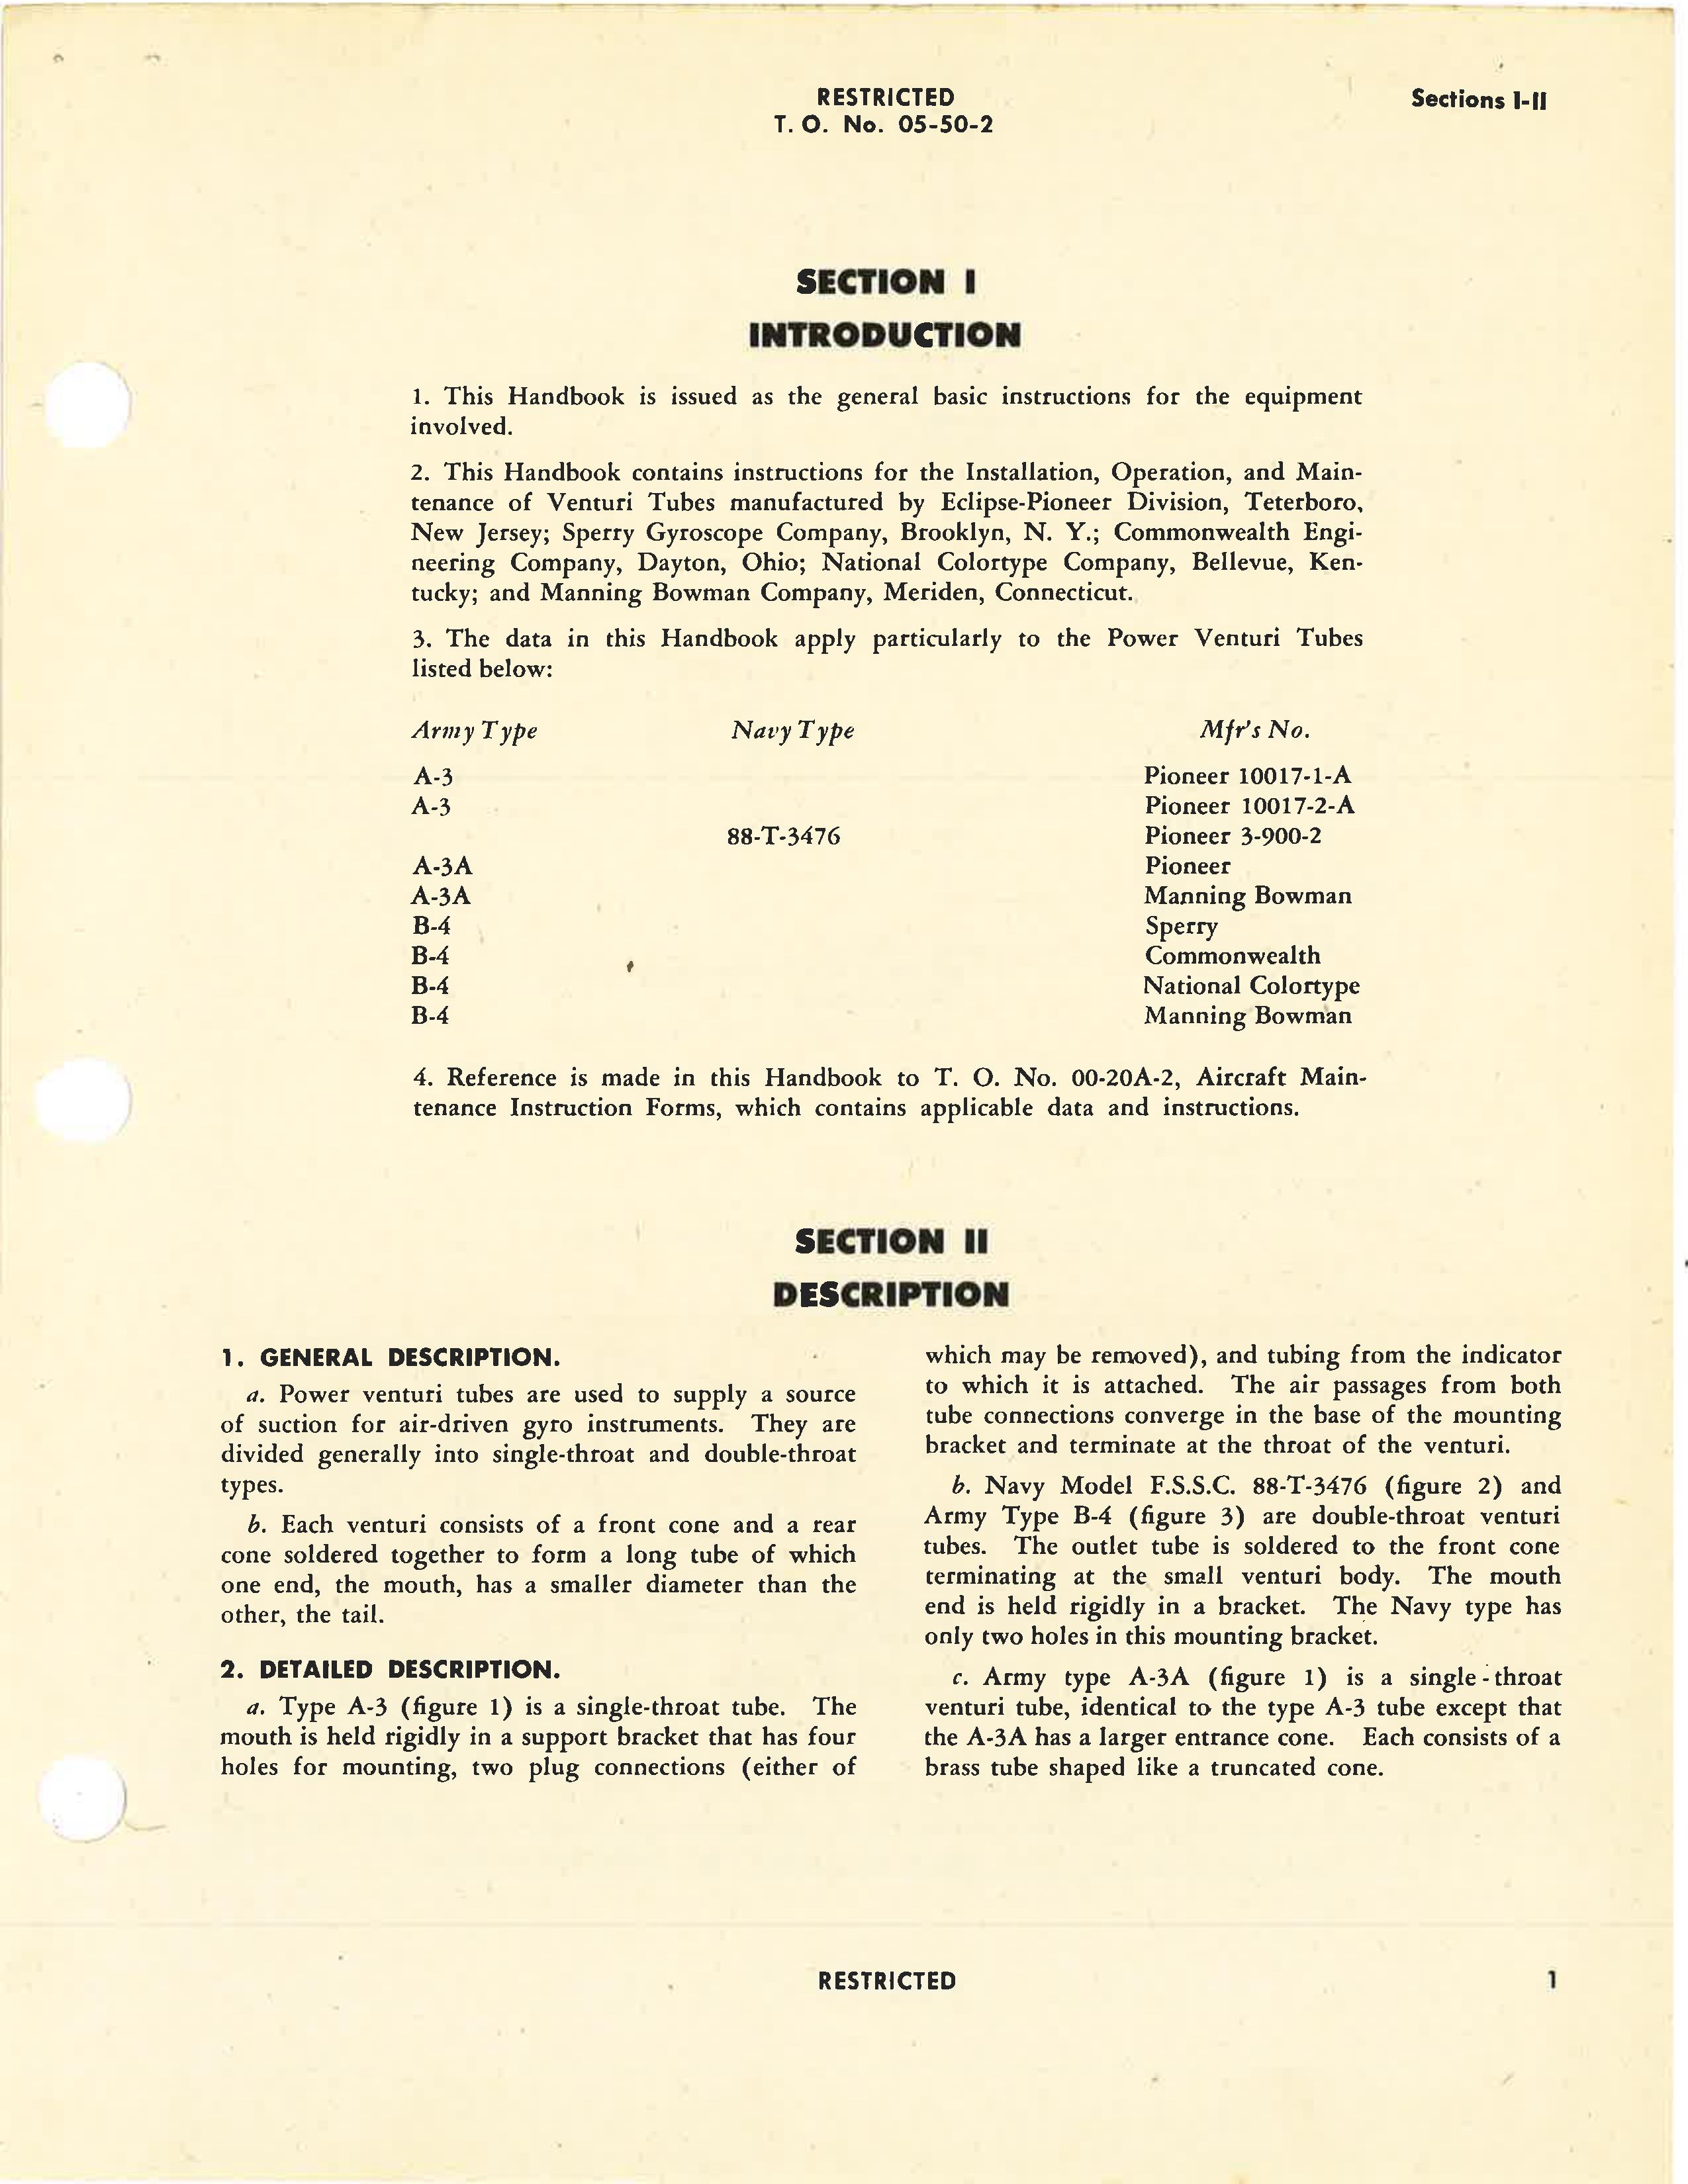 Sample page 7 from AirCorps Library document: Handbook of Instructions with Parts Catalog for Types A-3, A-3A and B-4, Power Veturi Tubes